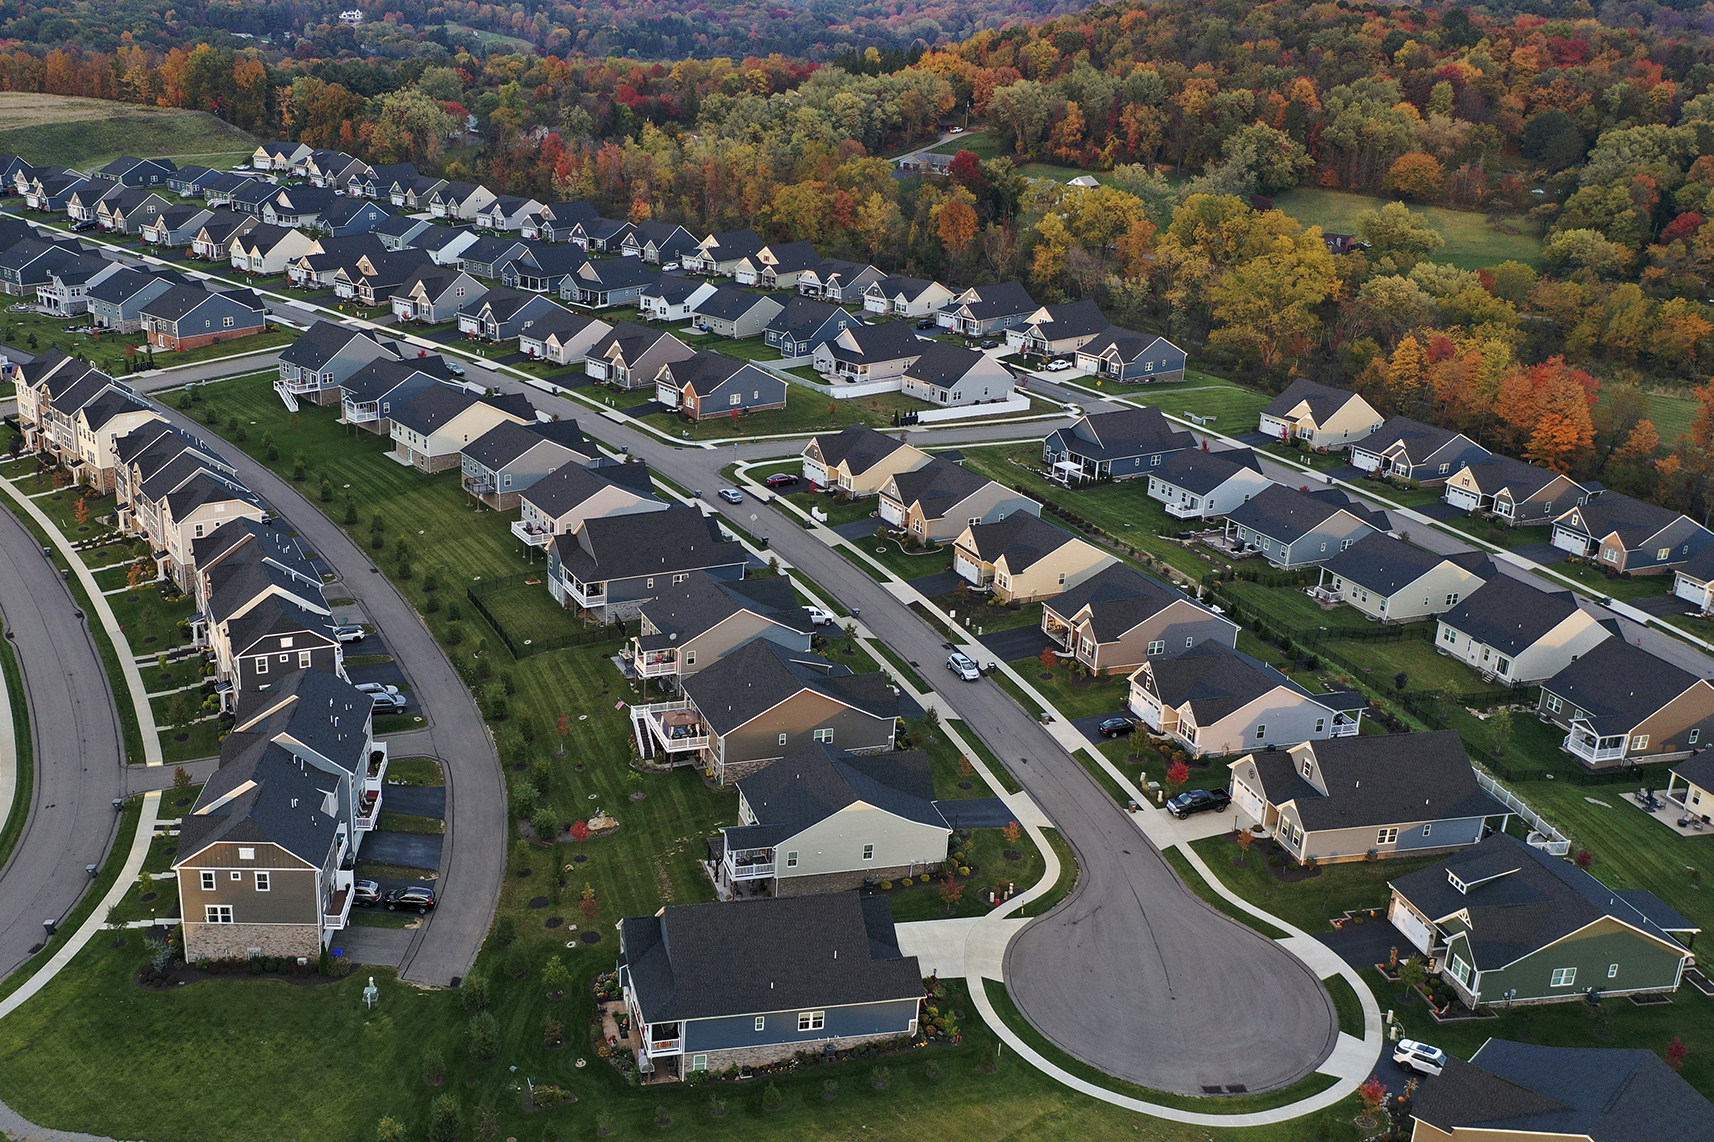 FILE - A new housing development in Middlesex Township, Pa., is shown on Oct. 12, 2022. The cost of hiring a real estate agent to buy or sell a home is poised to change along with decades-old rules that have helped determine broker commissions. (AP Photo/Gene J. Puskar, File)